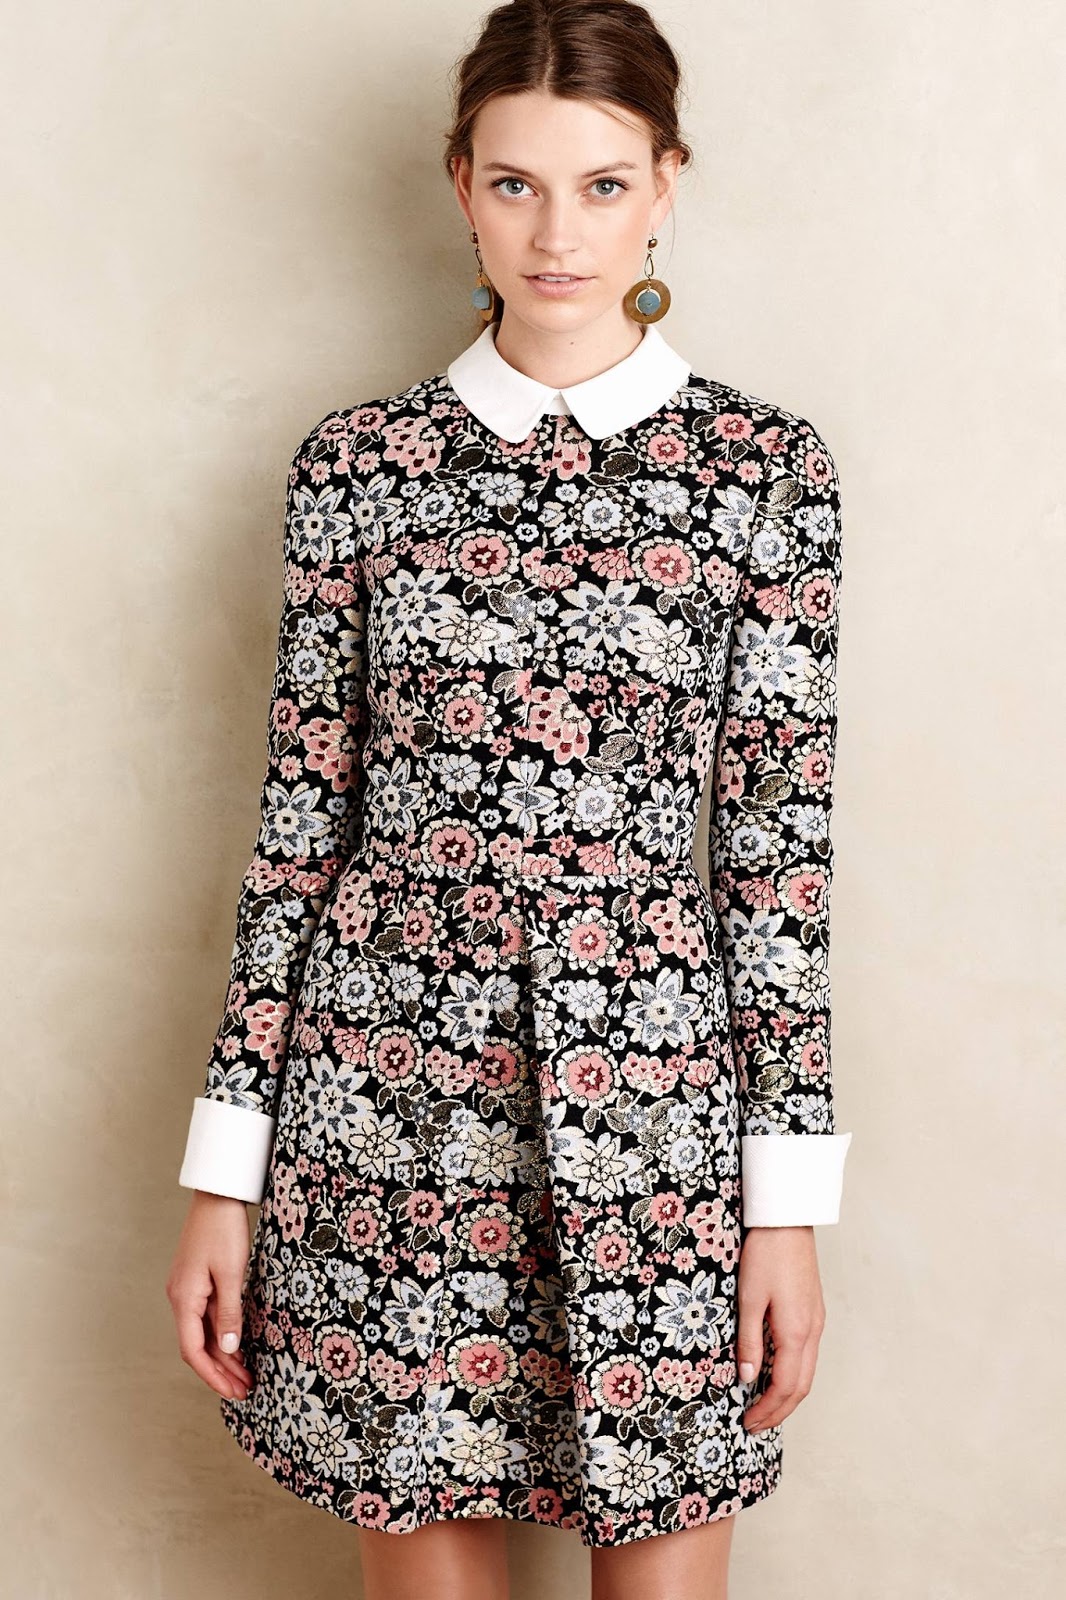 Anthropologie's making the most of my favorite kind of print for Fall!